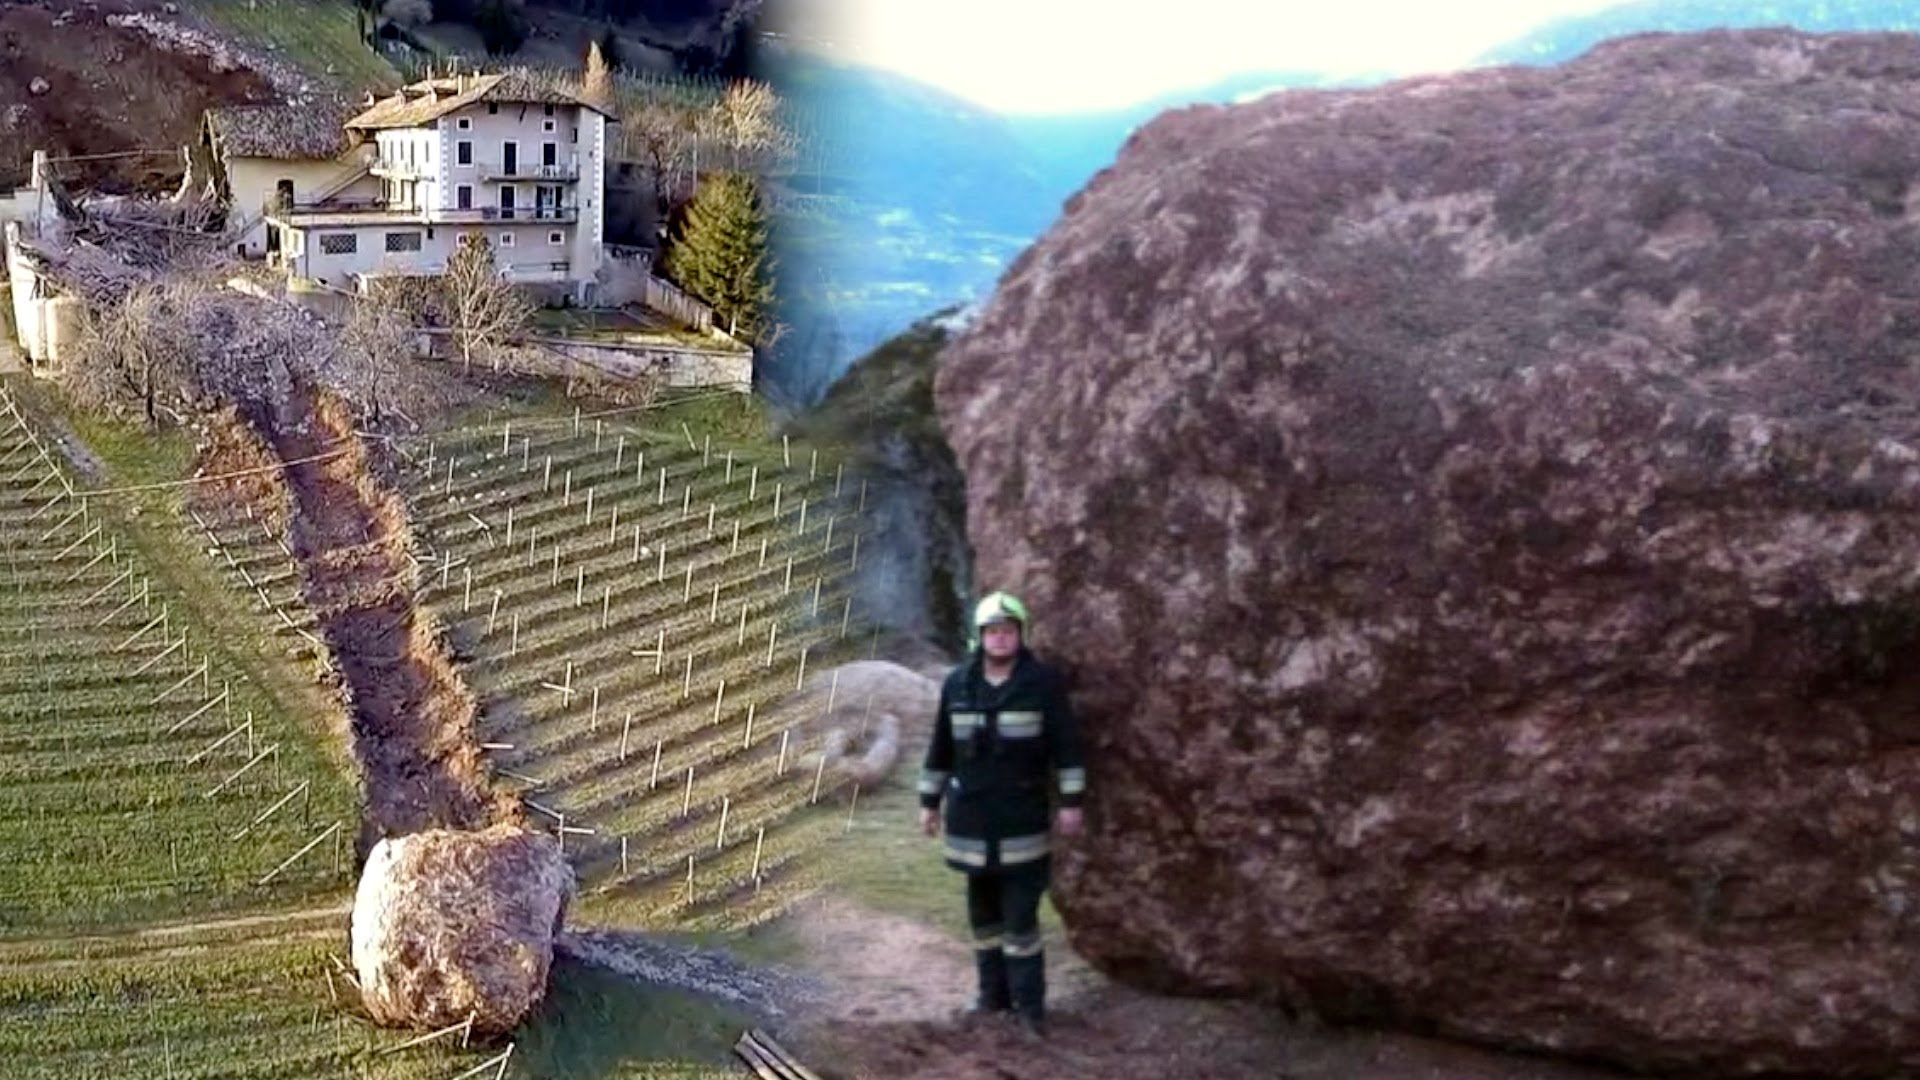 Giant Boulder Cuts Italian Country House in Half - YouTube